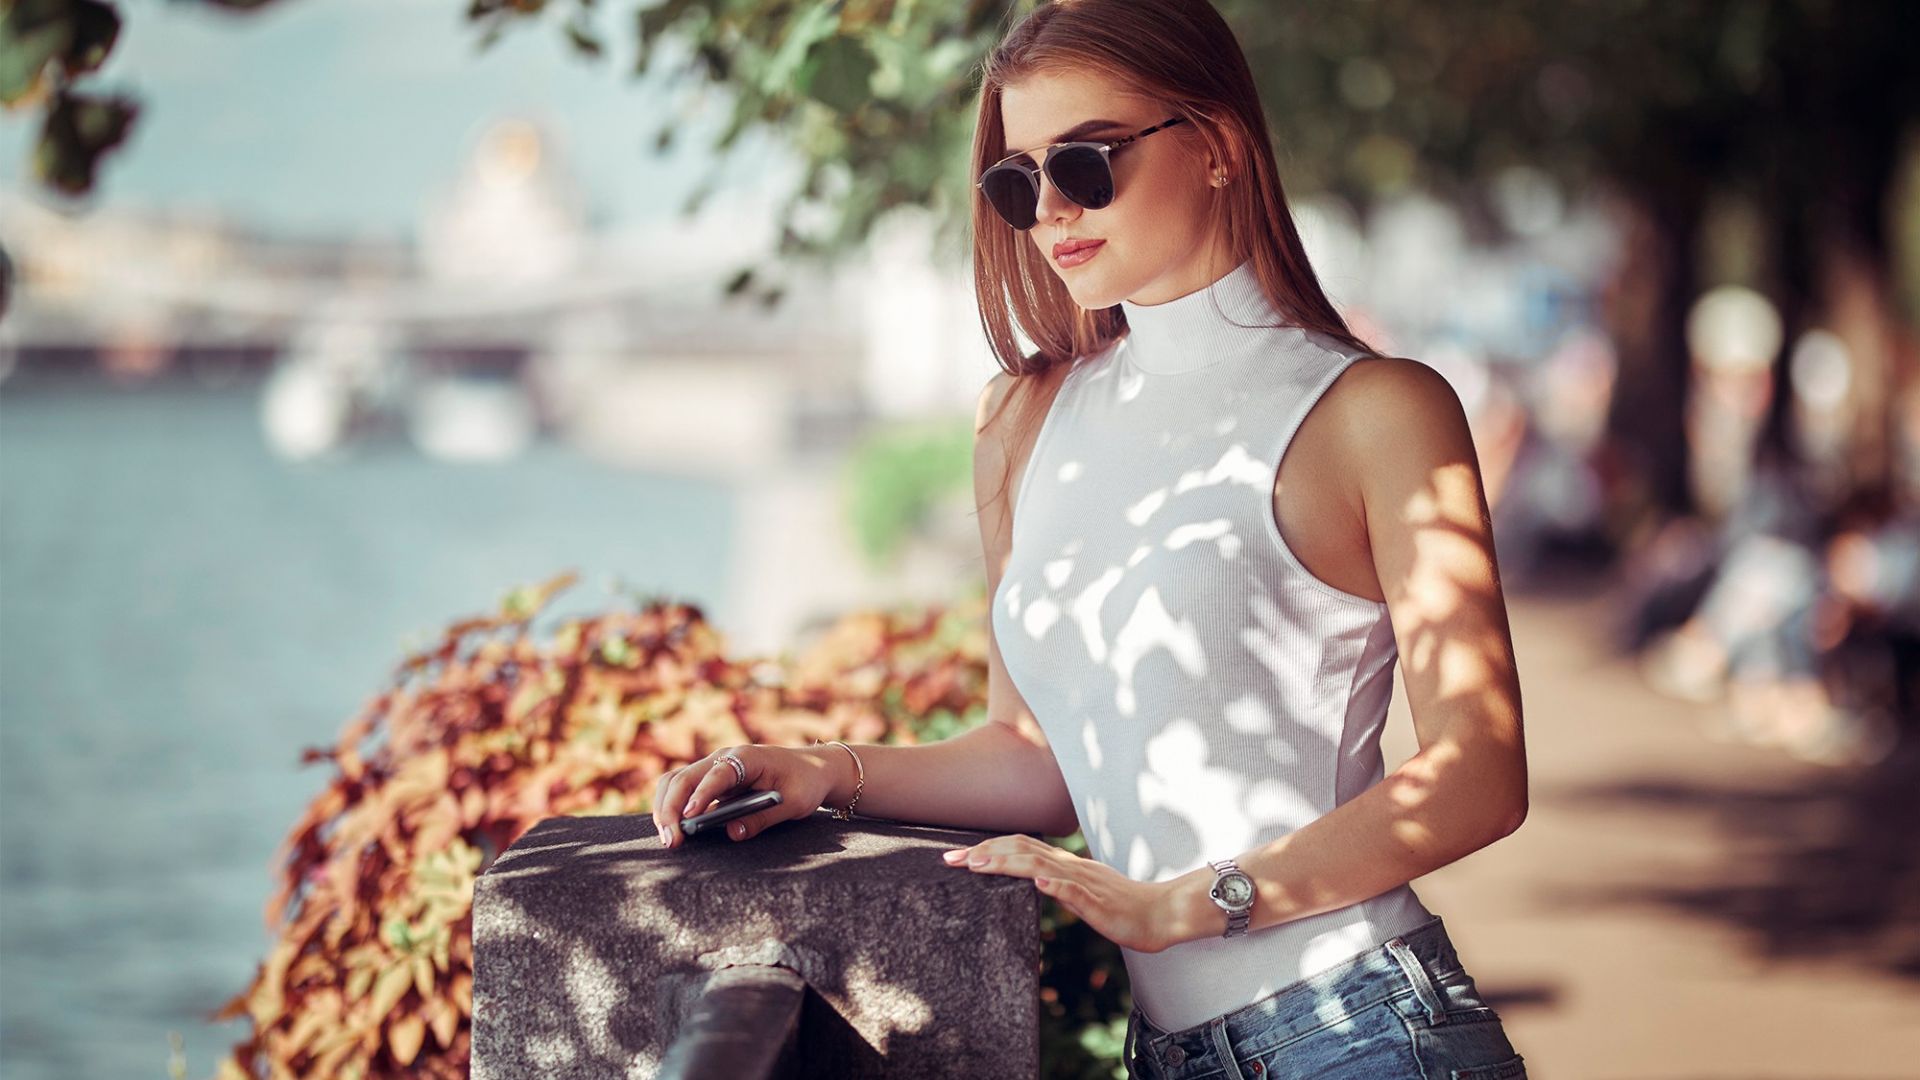 Wallpaper Girl model, jeans outfit, sunglasses